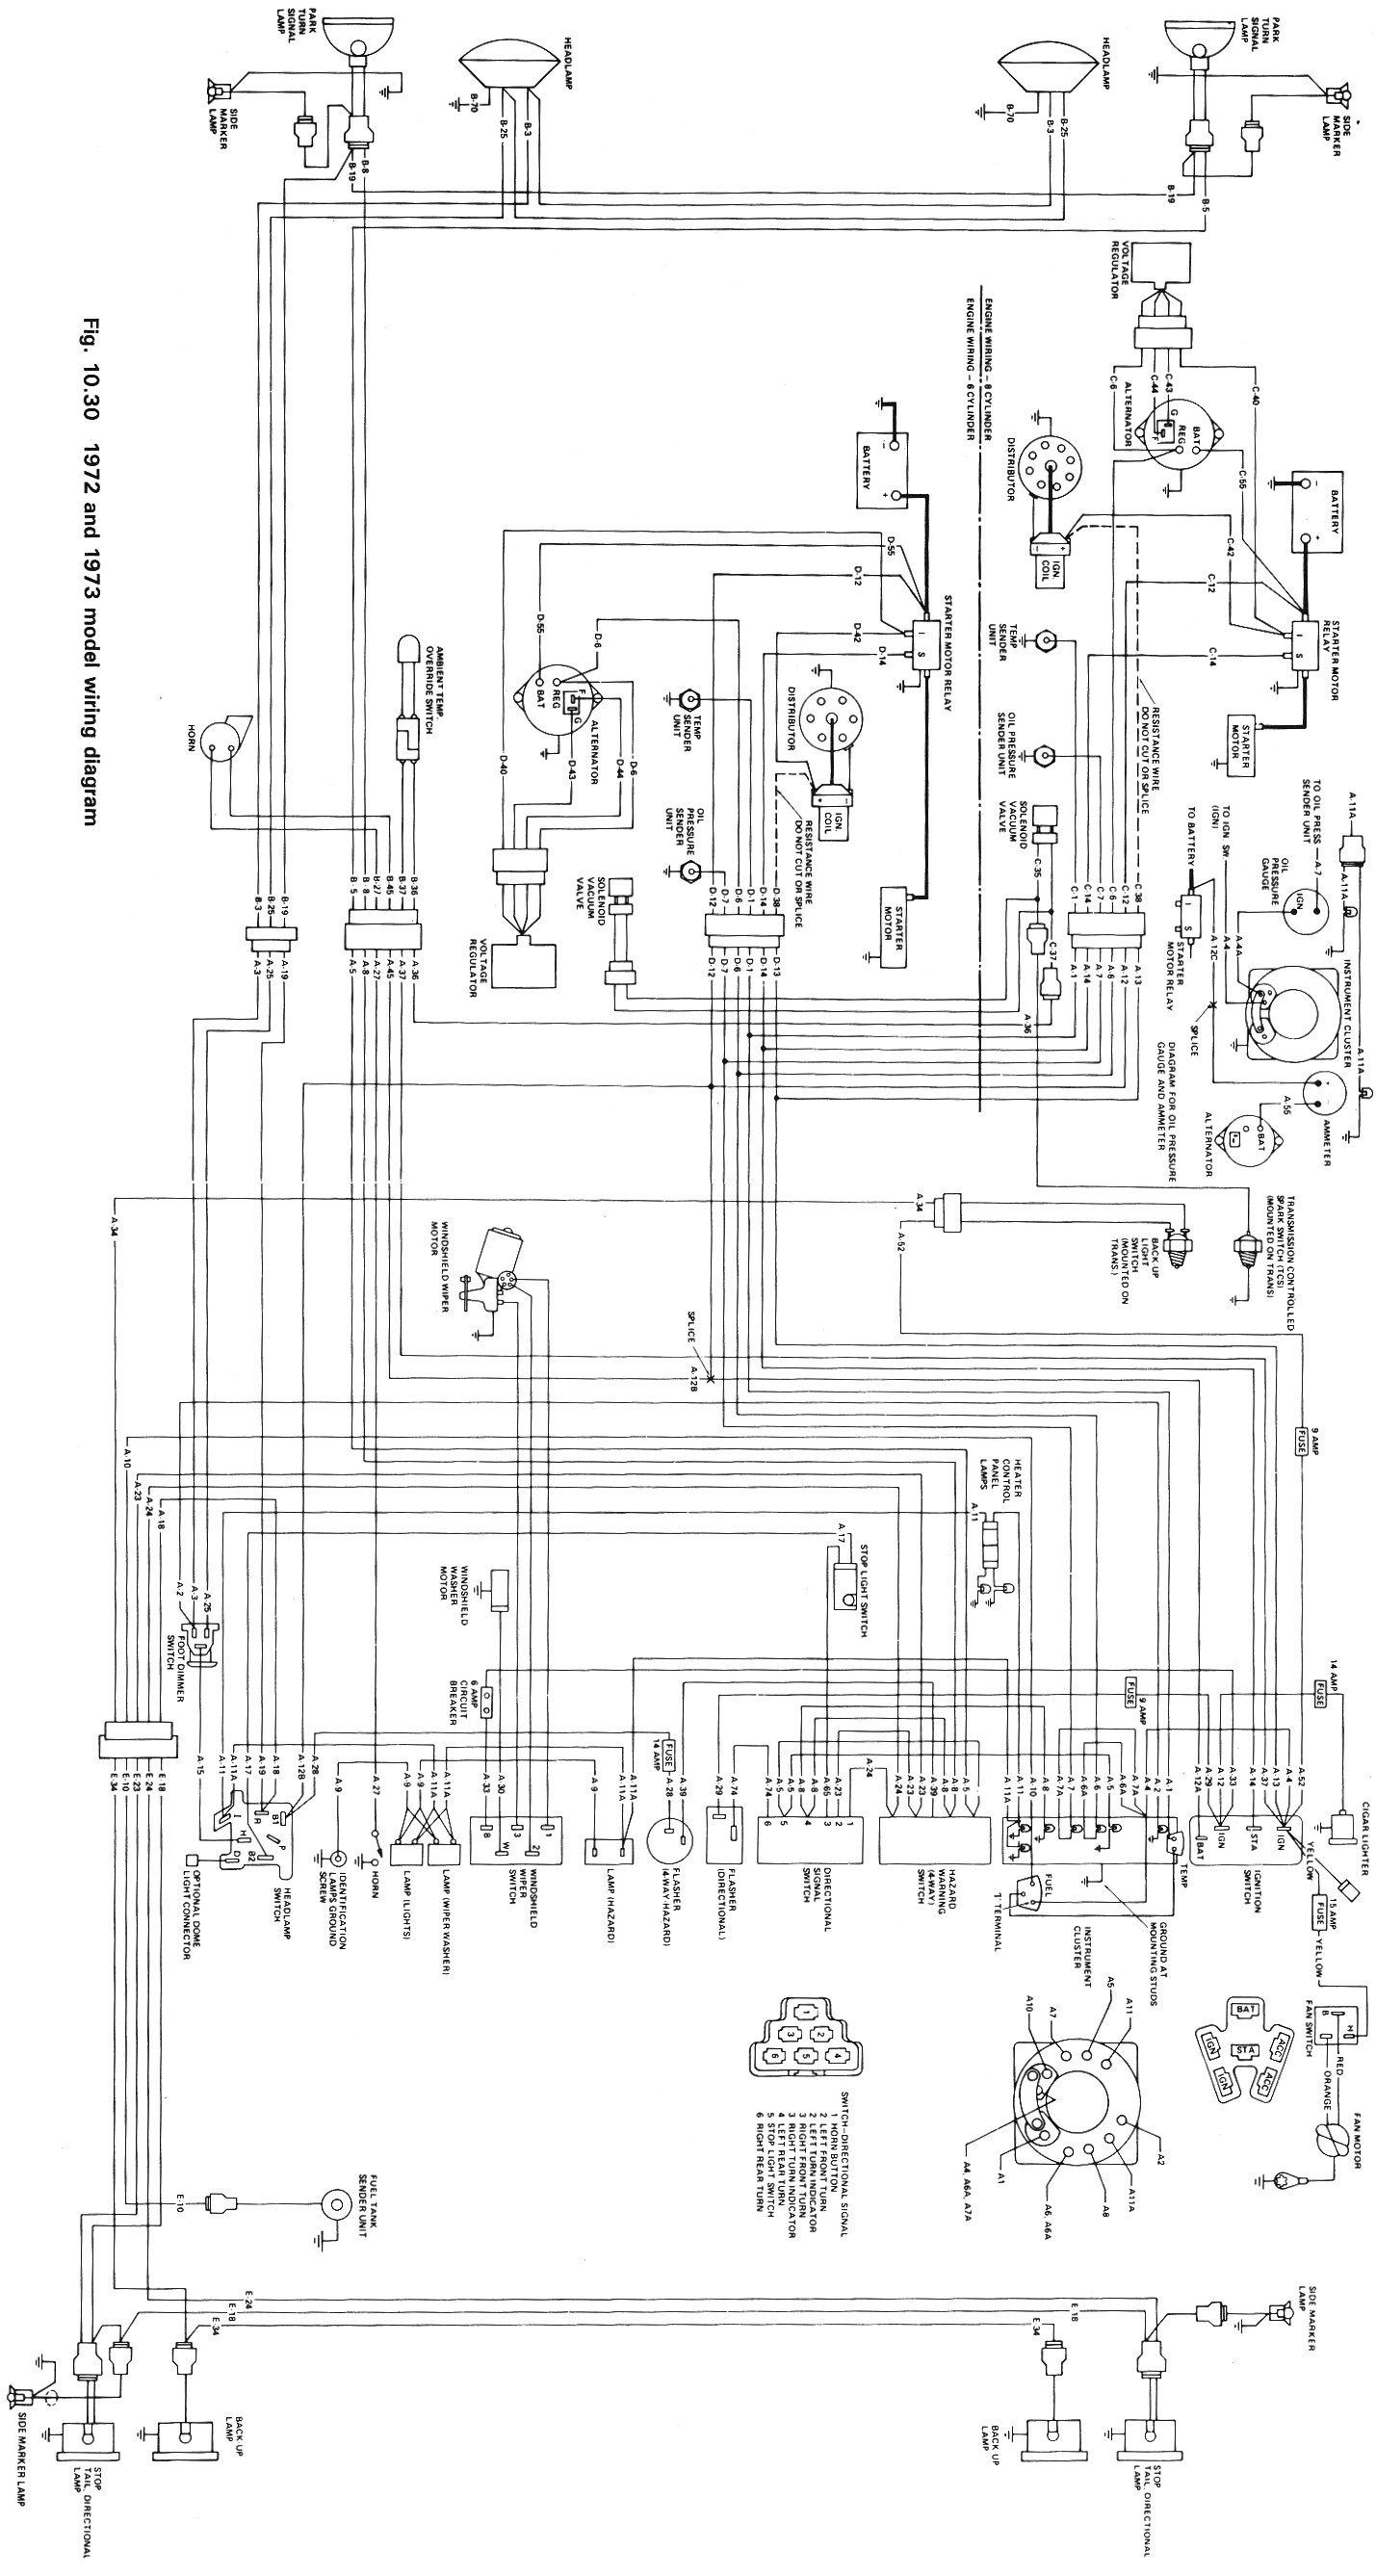 Wrire Schematic for A 1989 Ezgo Textron Model Xi875 Wrg 9303] 1958 Jeep Wiring Diagram Of Wrire Schematic for A 1989 Ezgo Textron Model Xi875